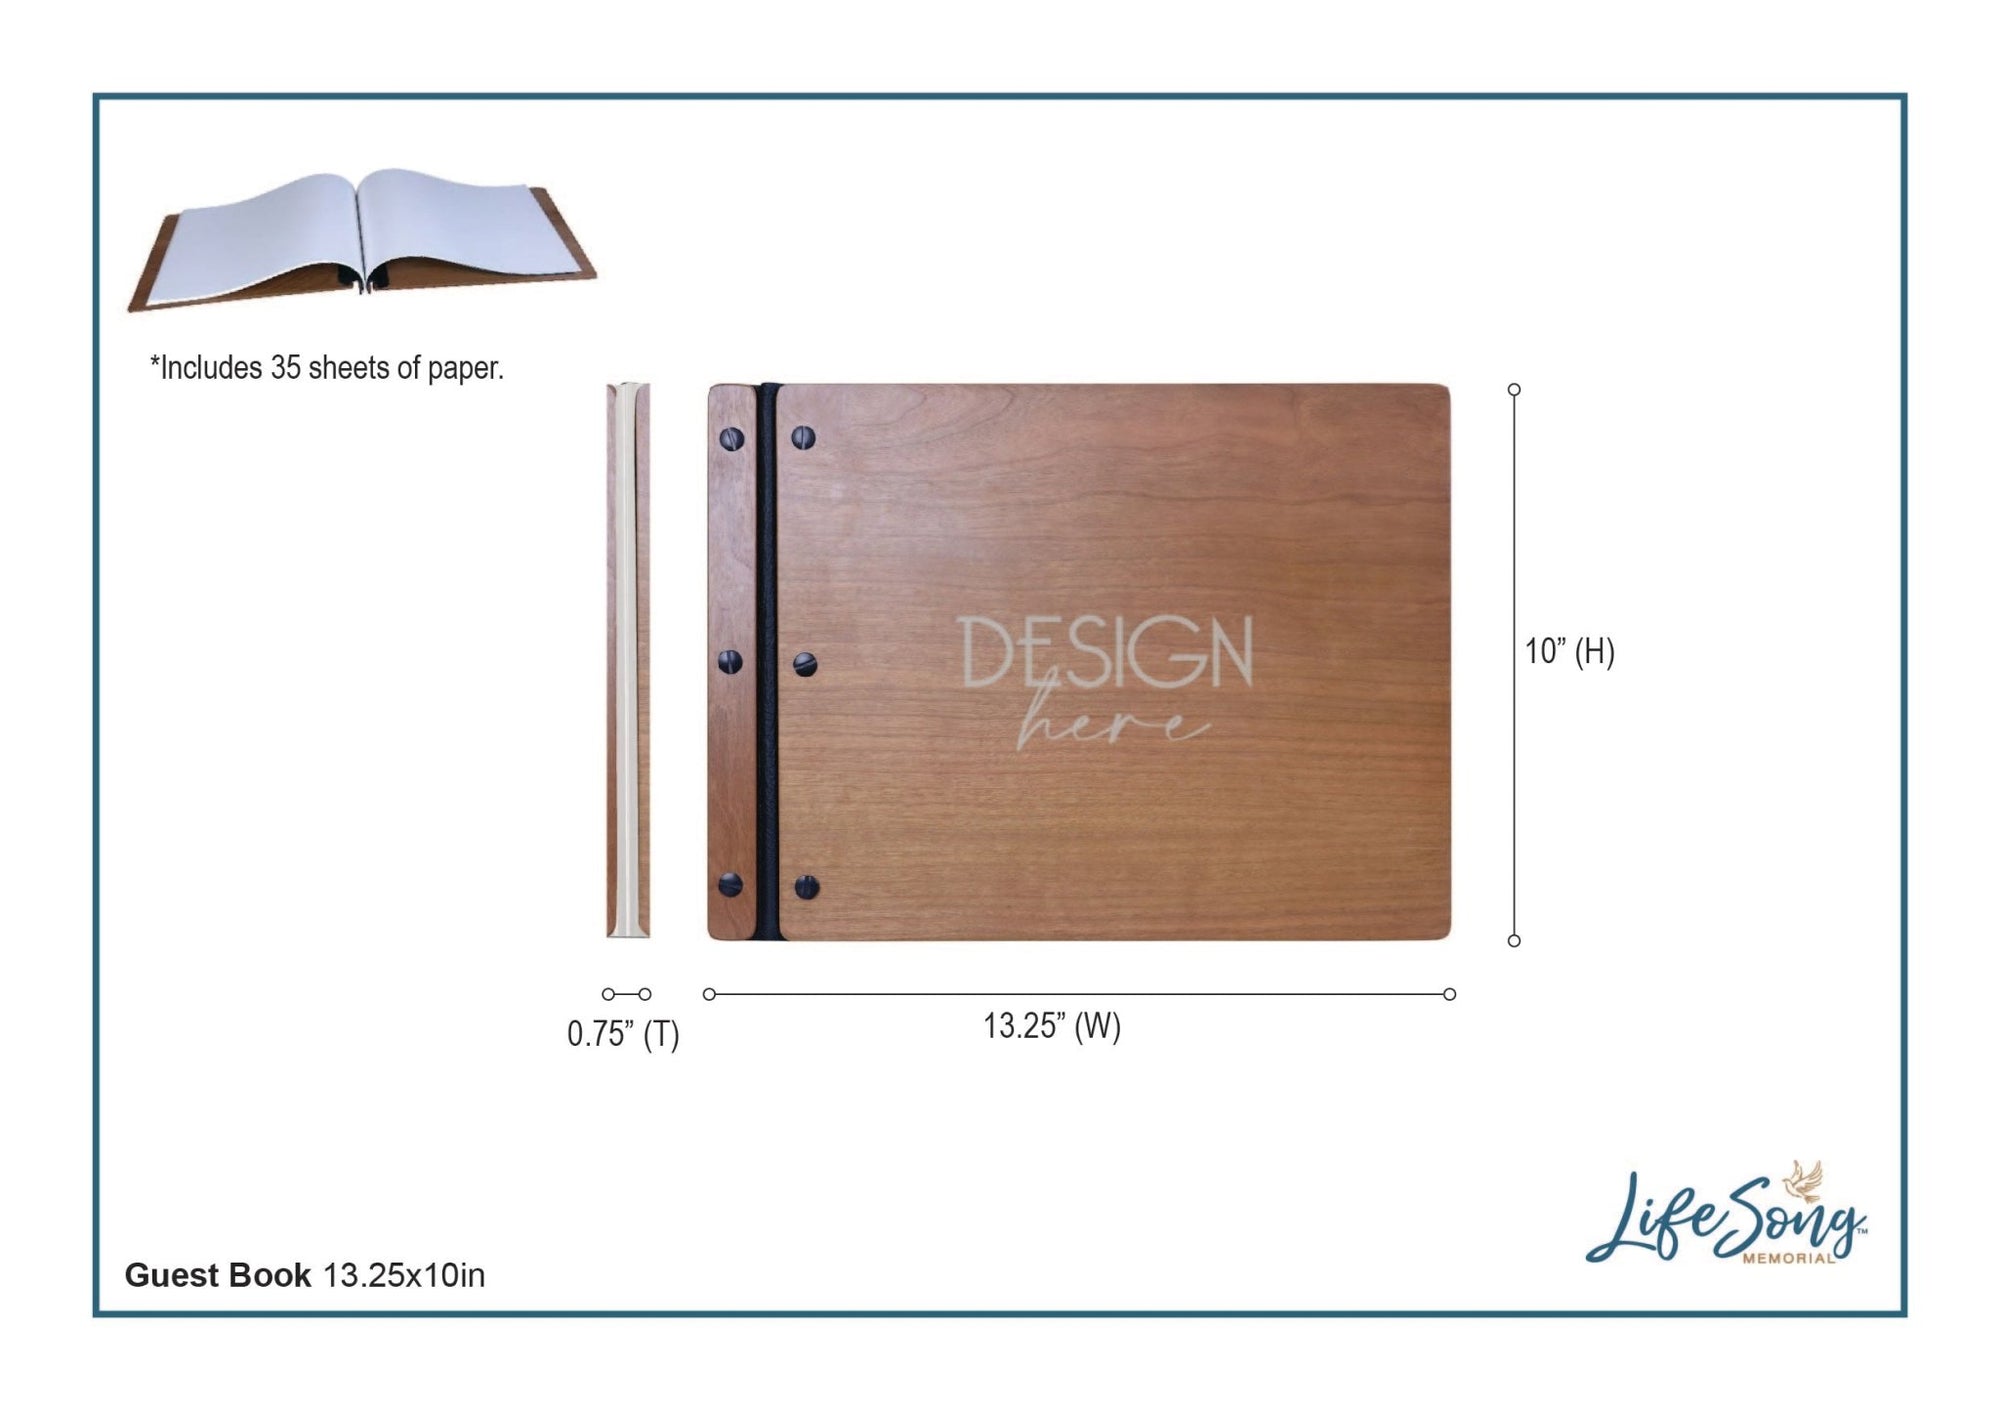 Custom Large Wooden Memorial Guestbook 13.375x10in - Those We Love (Cherry) - LifeSong Milestones